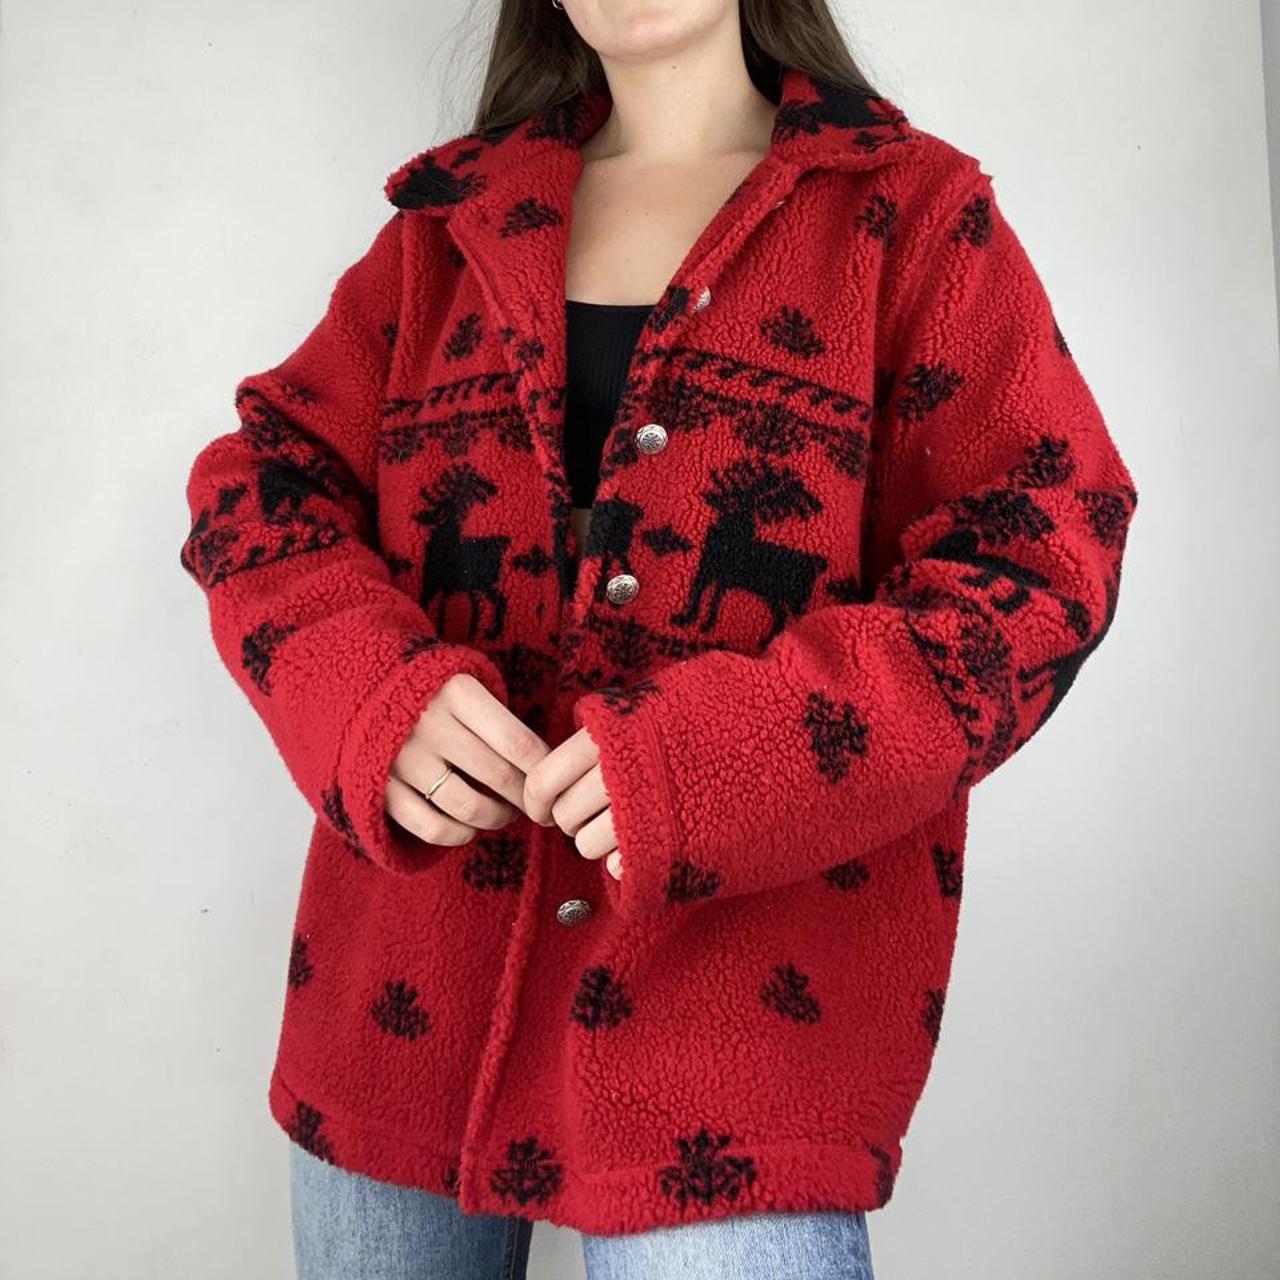 Product Image 2 - Vintage Oversized Teddy Coat❤️‍🔥
This adorable